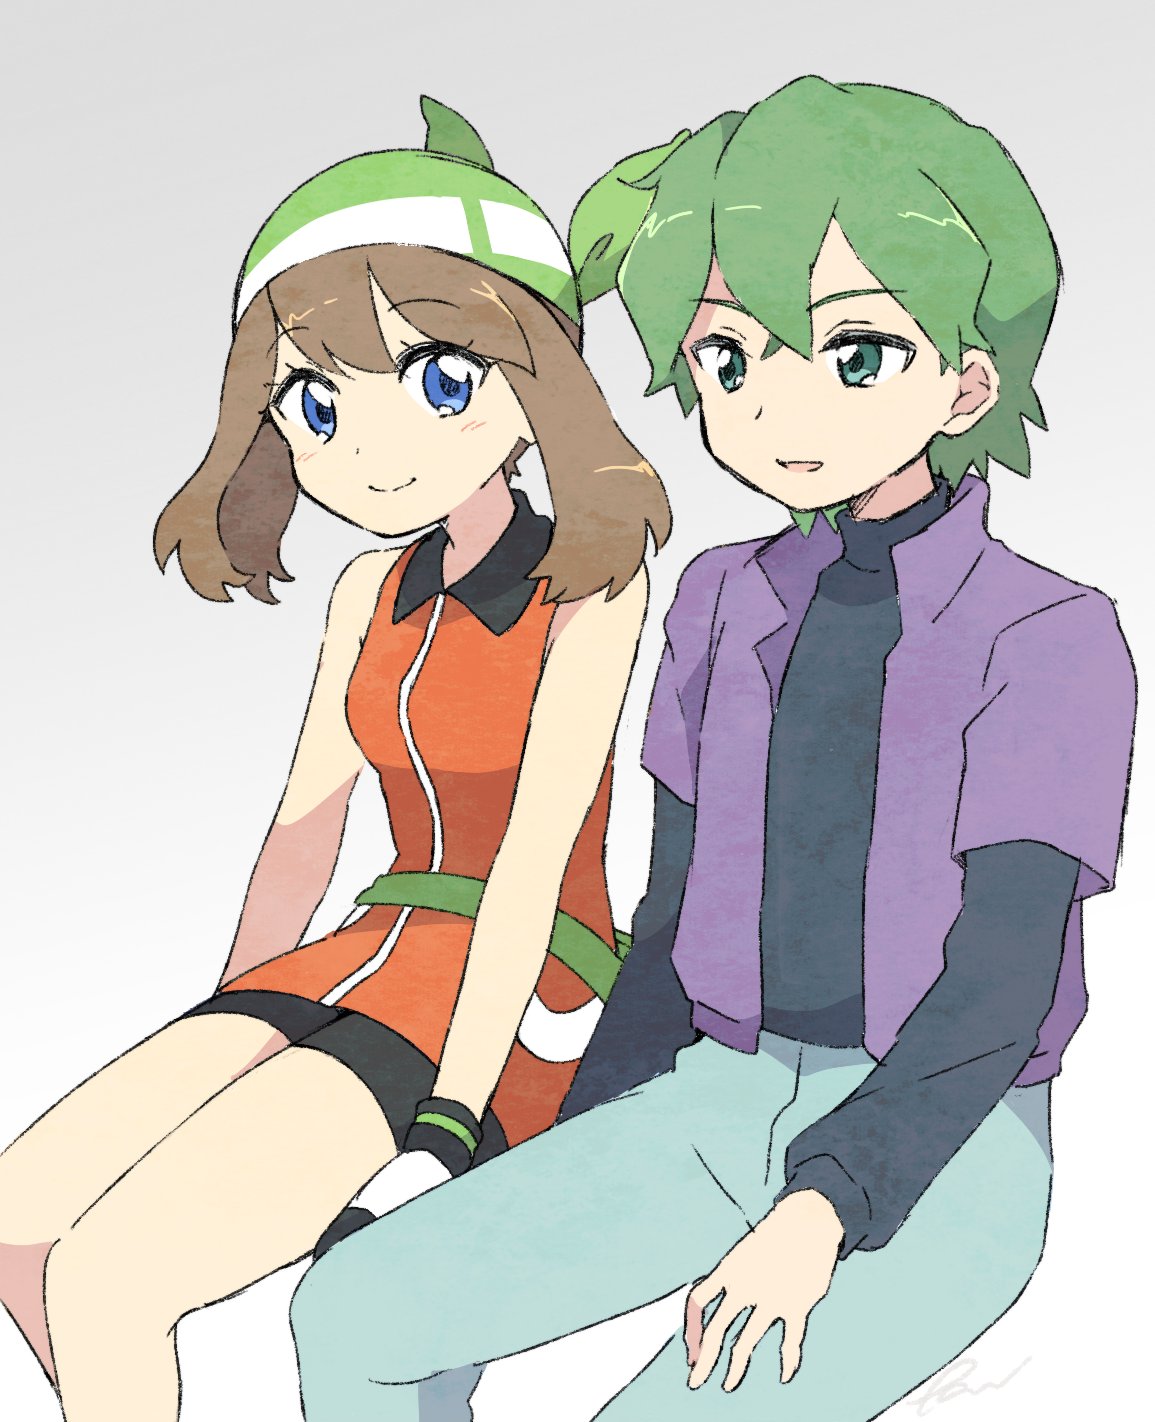 1boy 1girl bangs bike_shorts blue_eyes brown_hair closed_mouth commentary_request drew_(pokemon) eye_contact eyebrows_visible_through_hair eyelashes fanny_pack gloves green_bandana green_eyes green_hair green_pants highres jacket looking_at_another may_(pokemon) n8dc9o pants parted_lips pokemon pokemon_(anime) pokemon_rse_(anime) purple_jacket short_sleeves smile